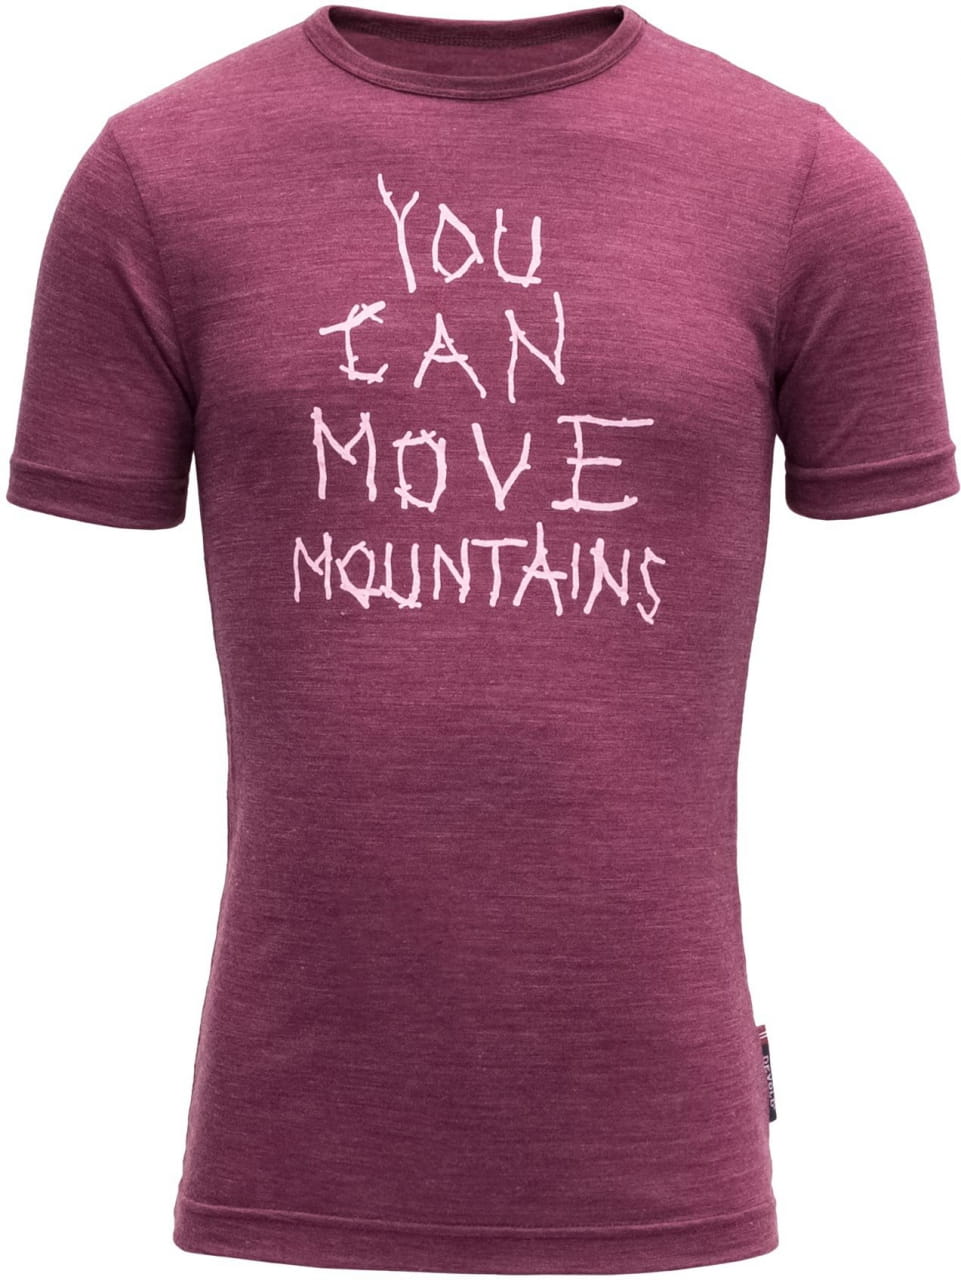 Kinder-T-Shirt aus Wolle Devold Moving Mountain Kid Tee